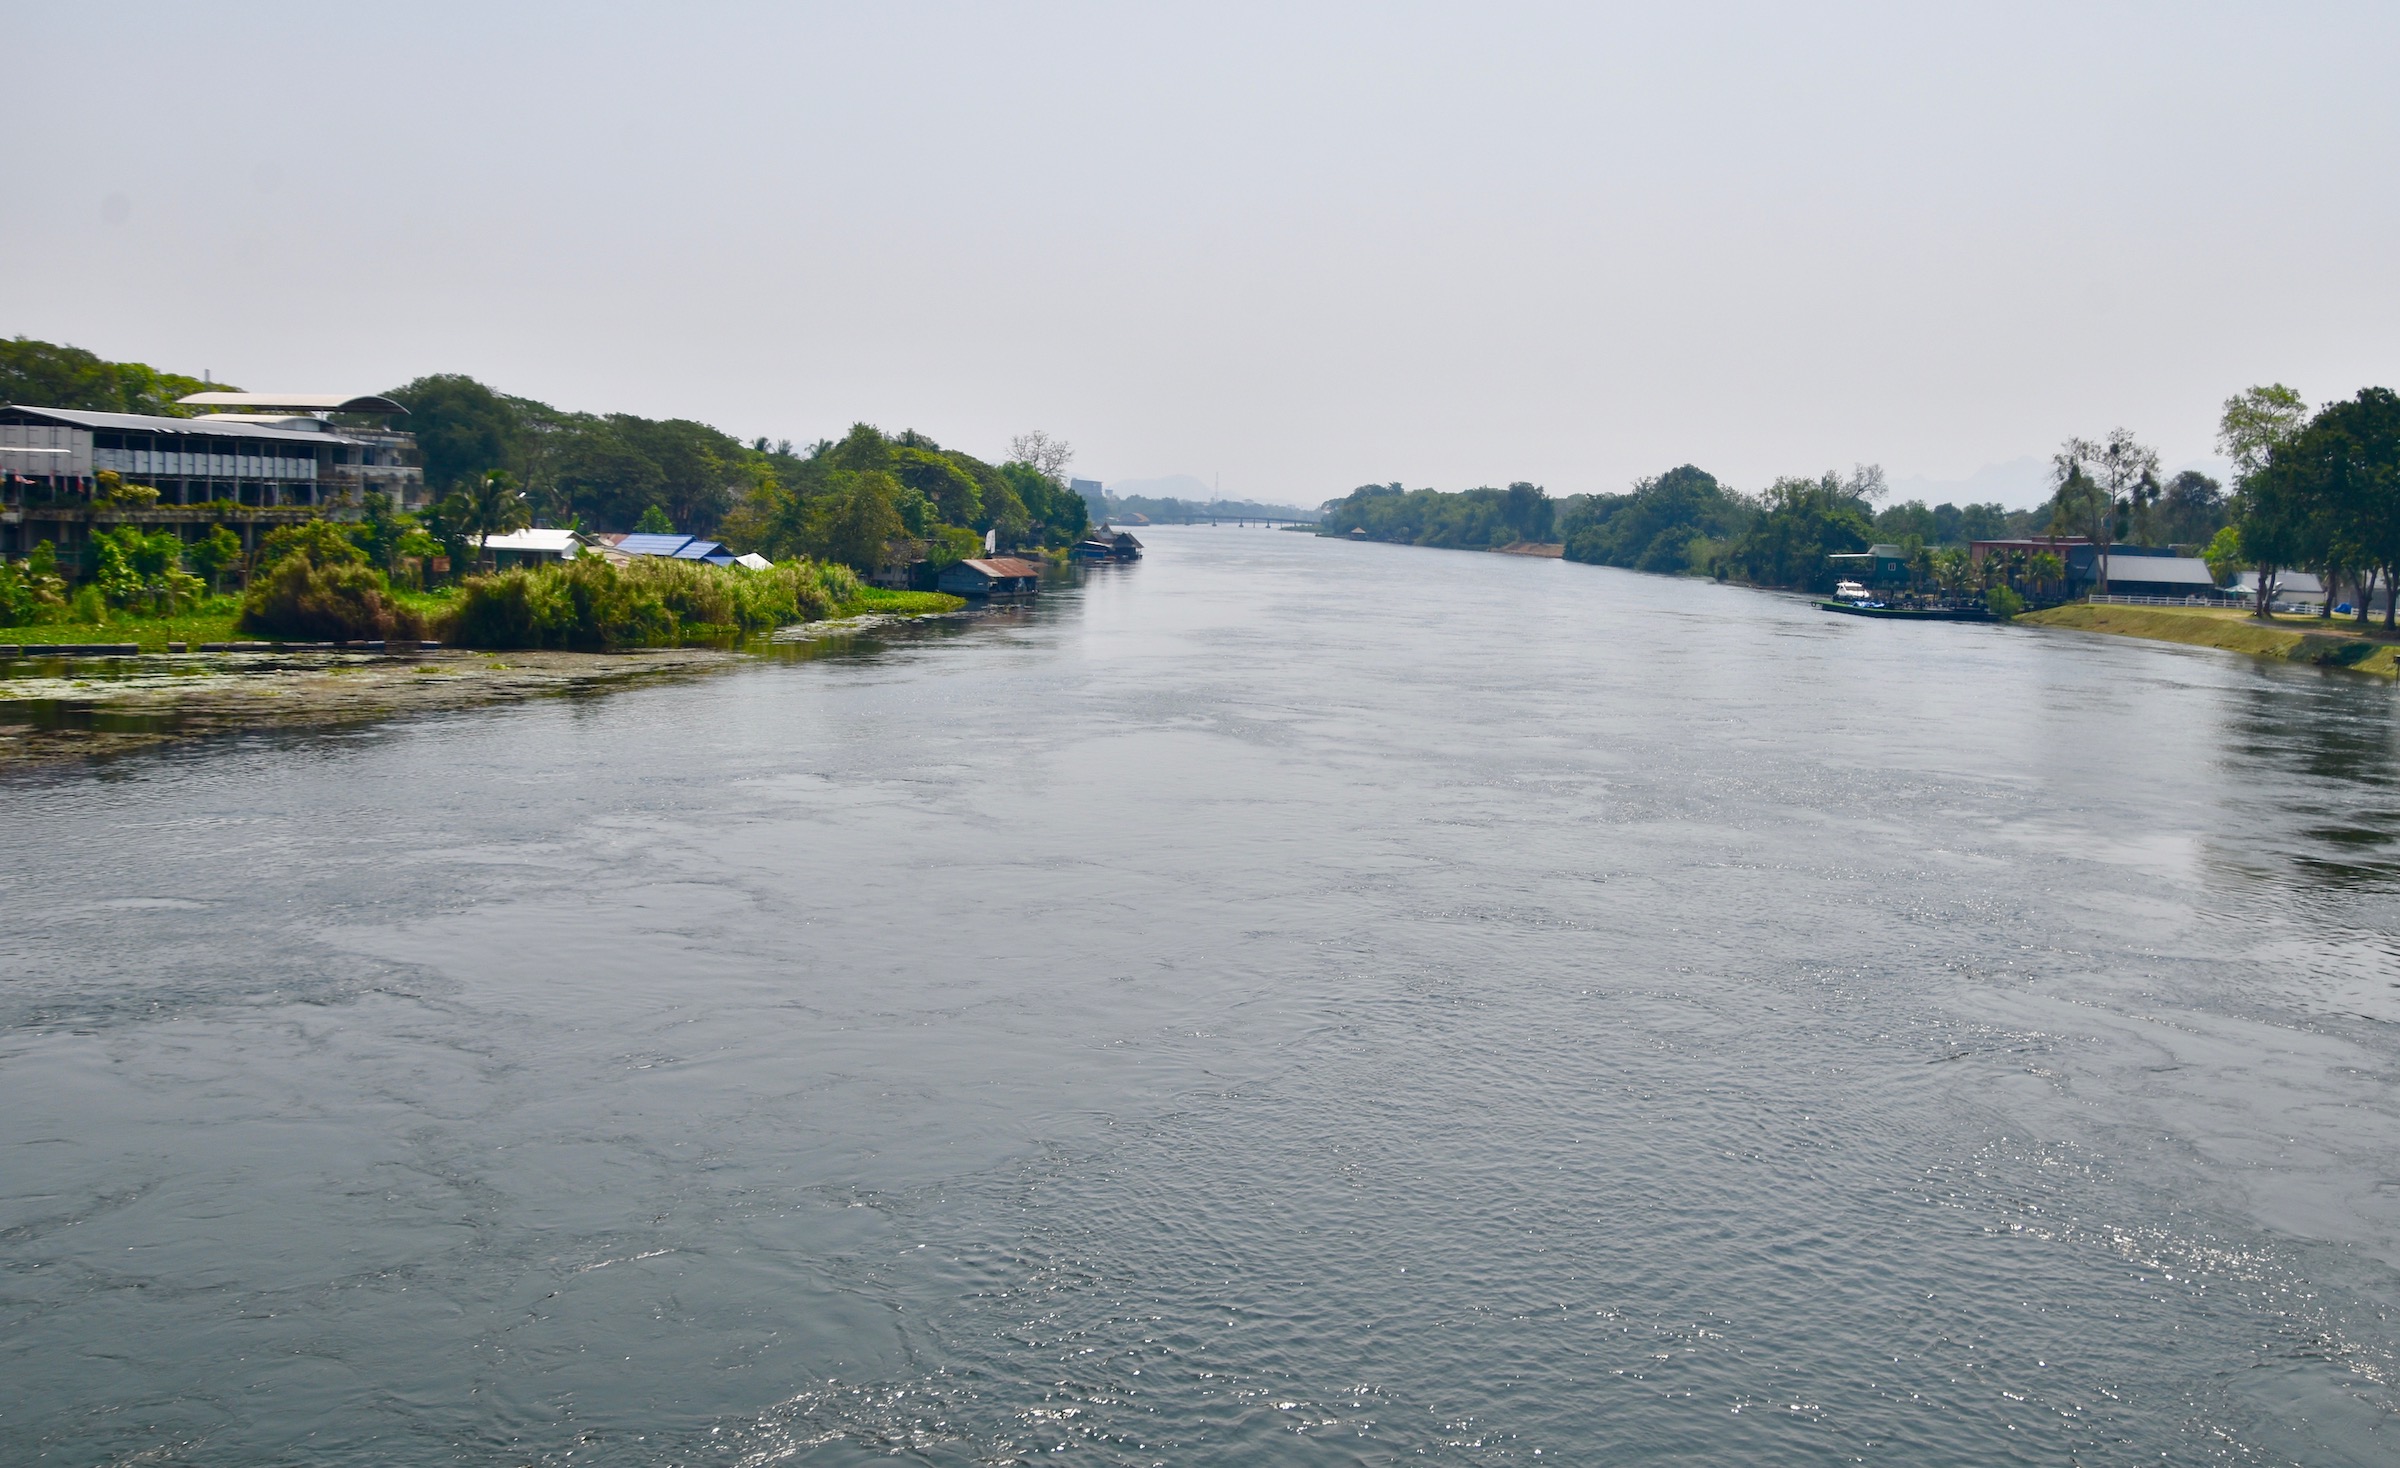 The River Kwai